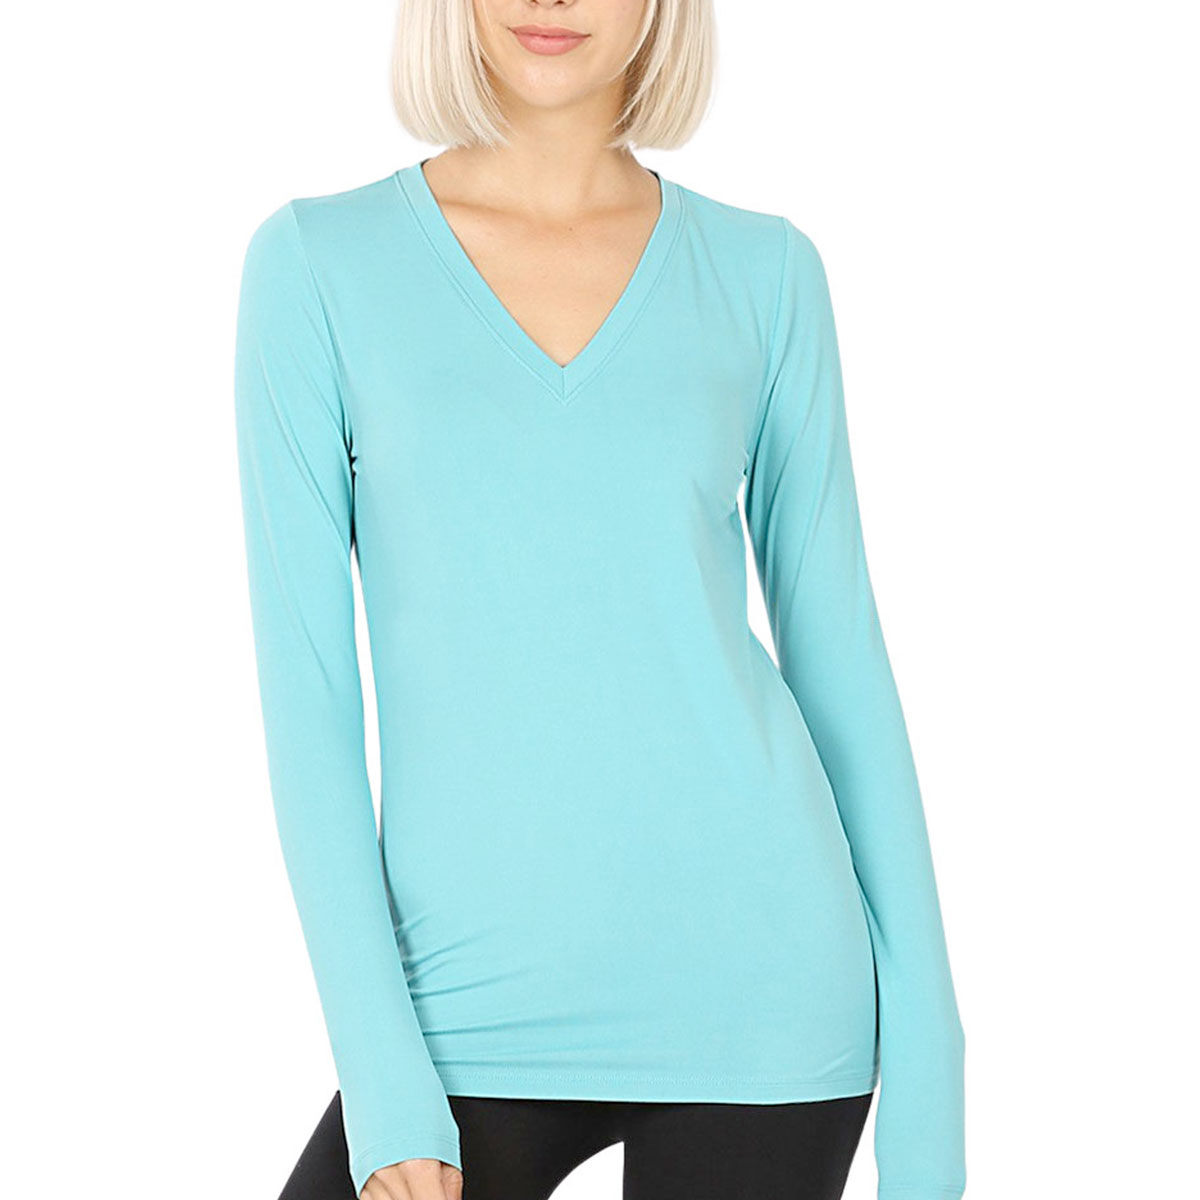 2053 - Round Neck Long Sleeve Tops ASH MINT Brushed Fiber - Round Neck Long Sleeve 2053 - Small